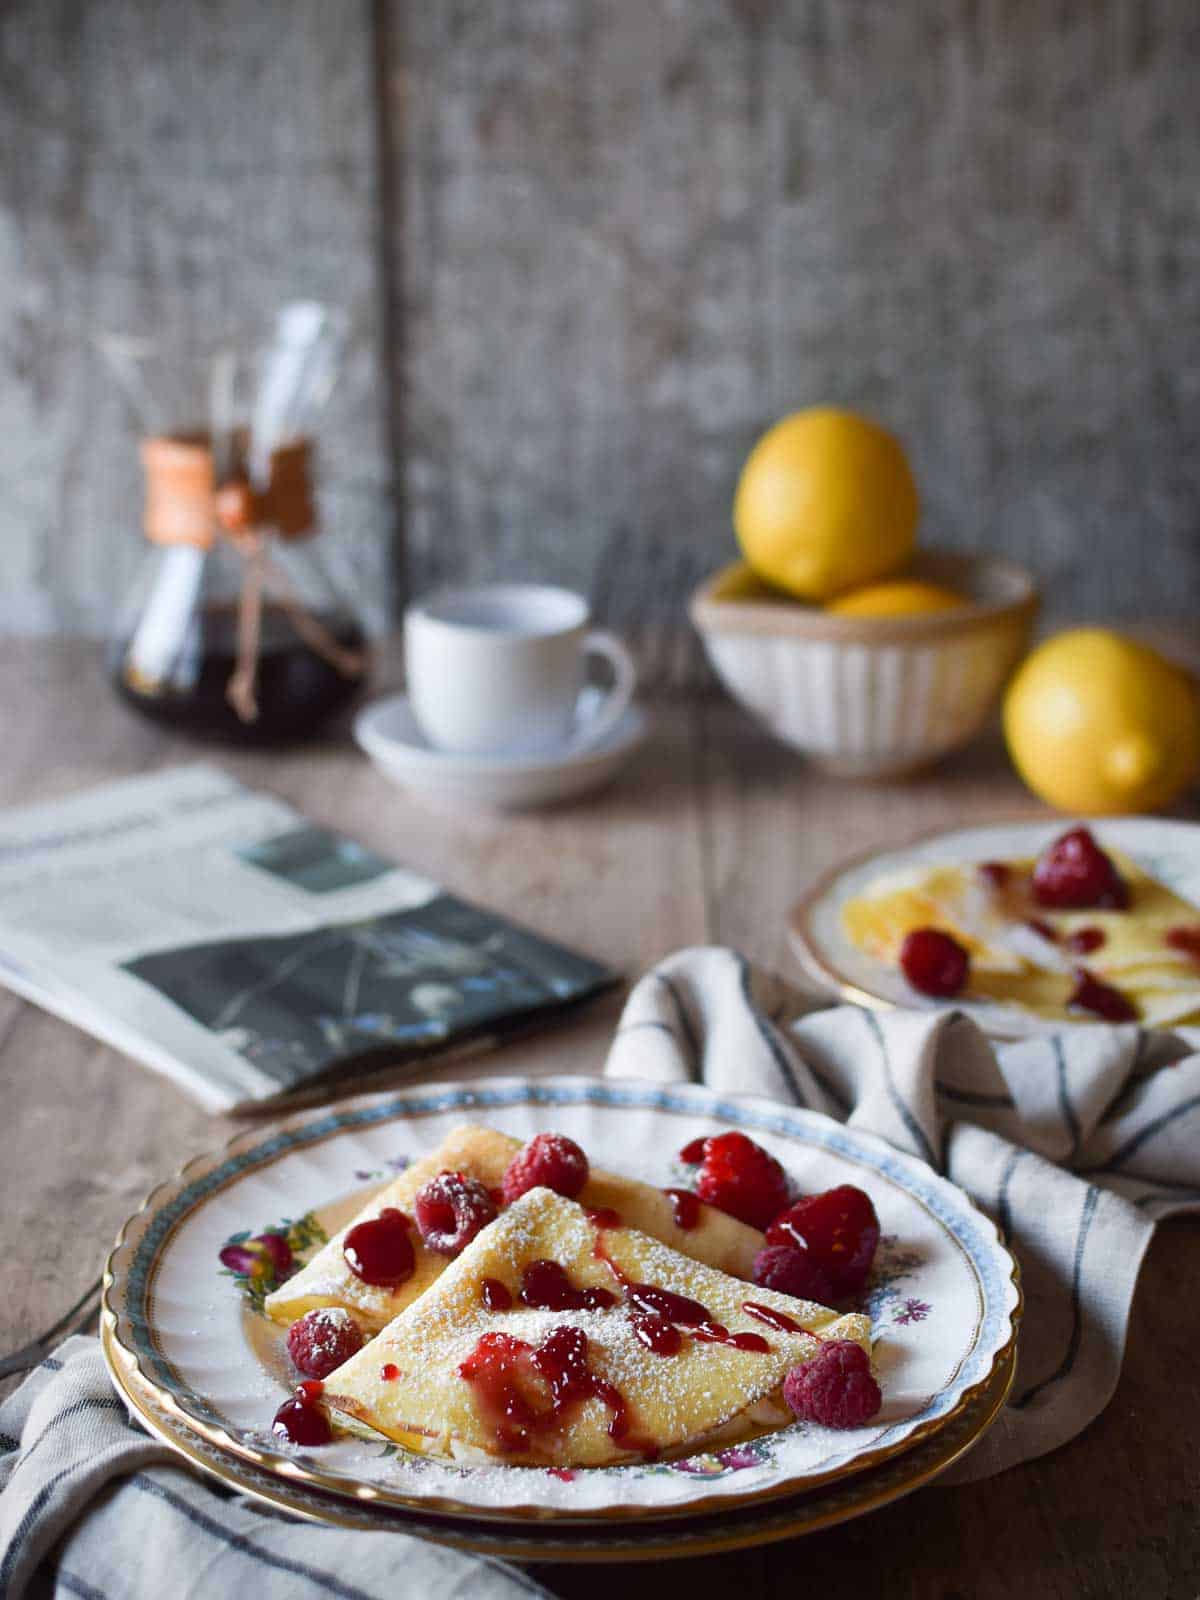 Stuffed crepes on a flowered plate with raspberry sauce on top, with coffee and lemons in the background.